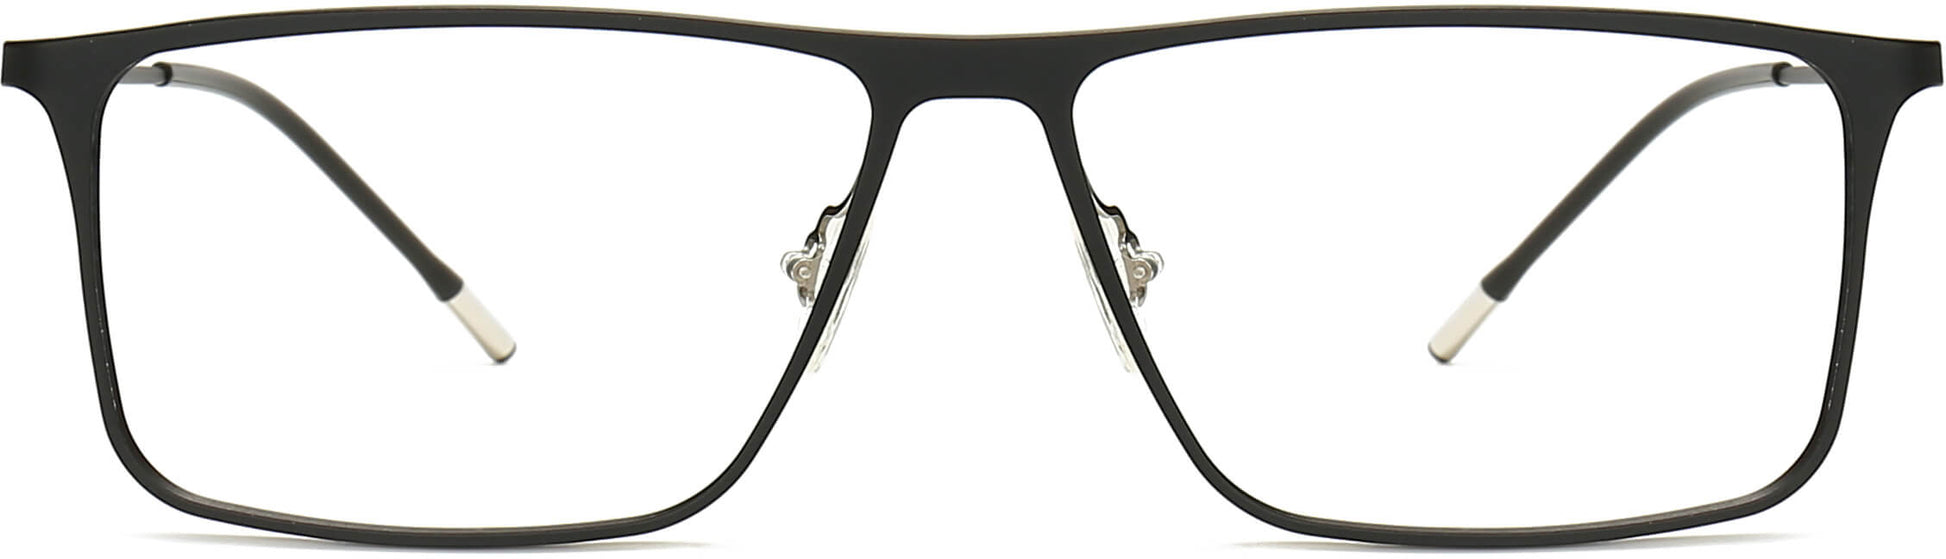 Hugh Rectangle Black Eyeglasses from ANRRI, front view